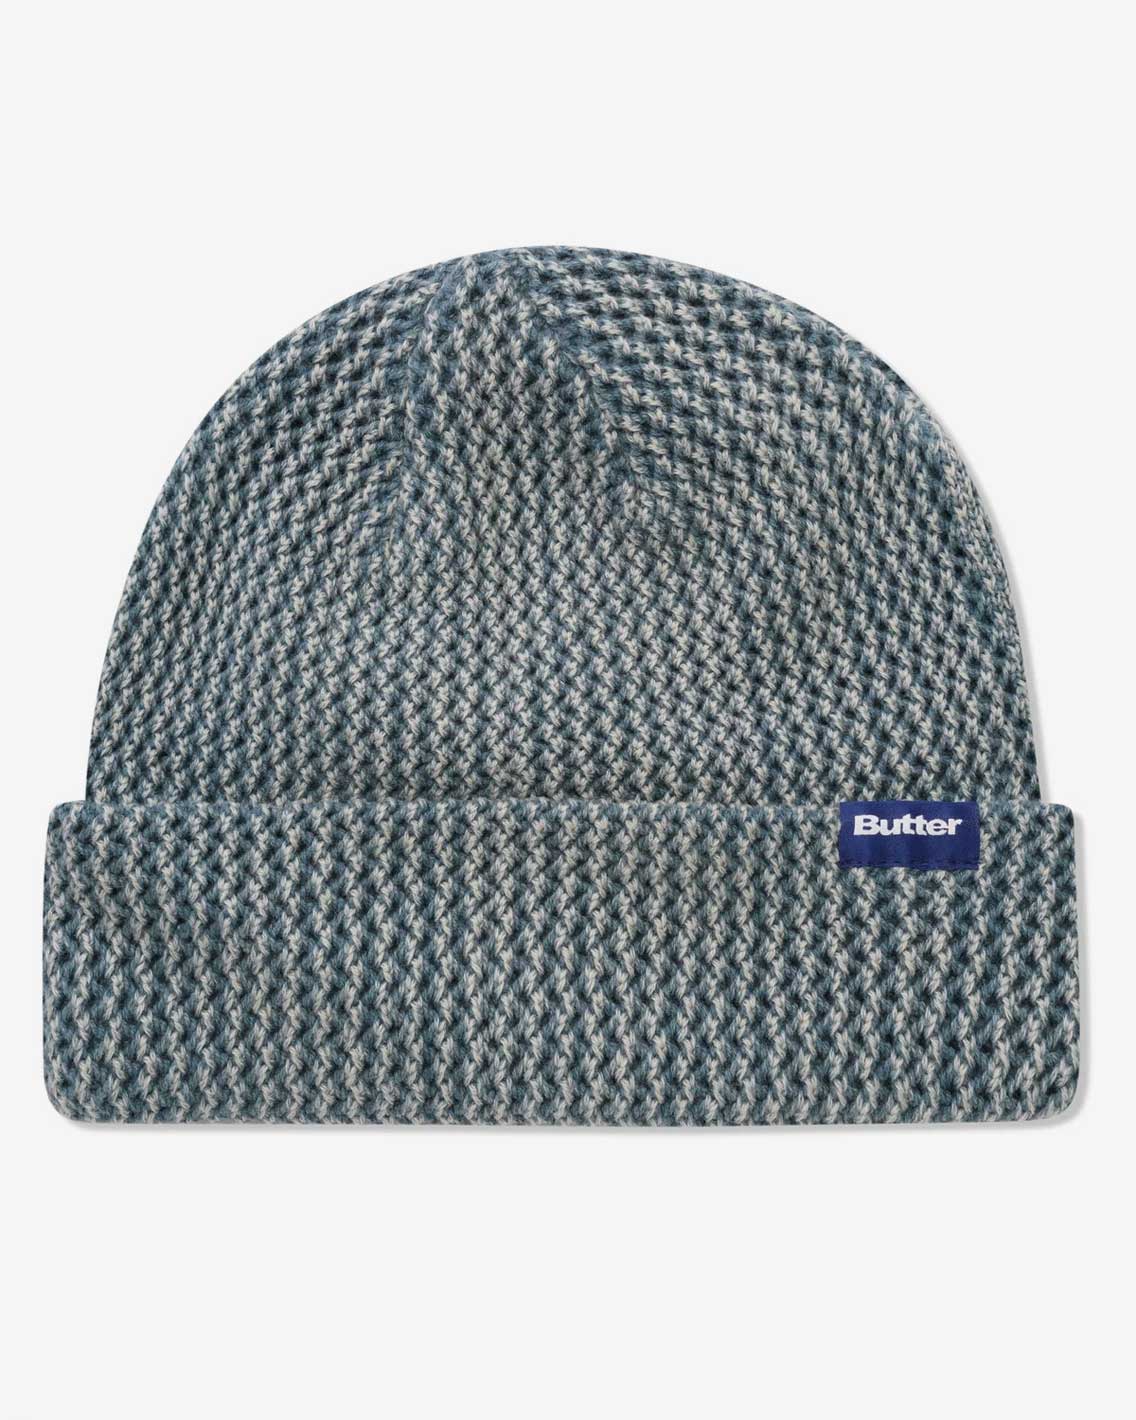 Butter Goods - Dyed Beanie - Washed Navy